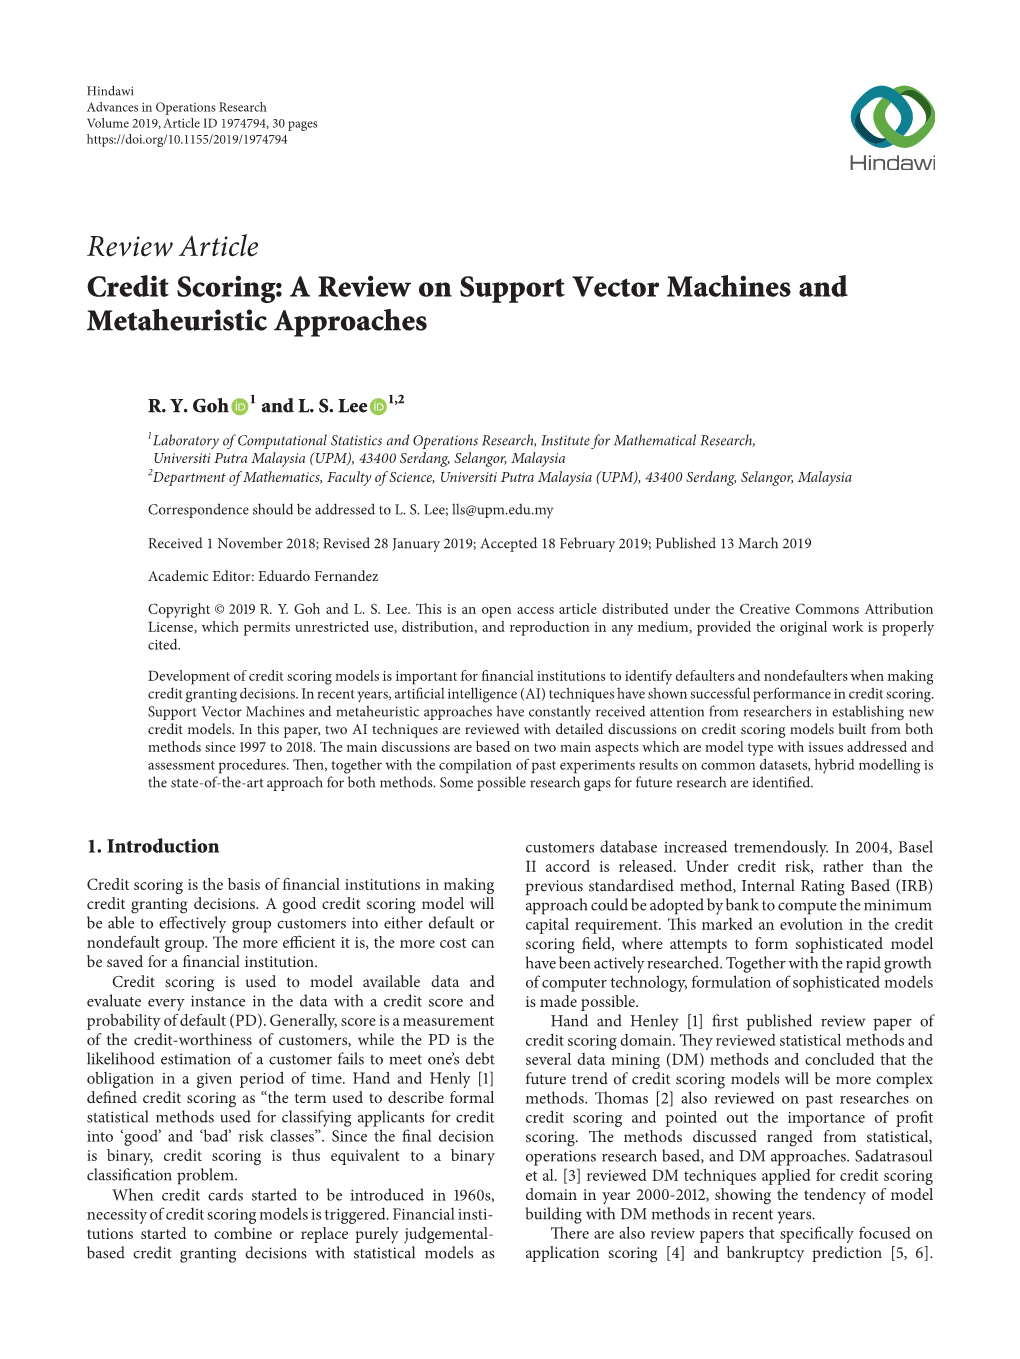 Credit Scoring: a Review on Support Vector Machines and Metaheuristic Approaches